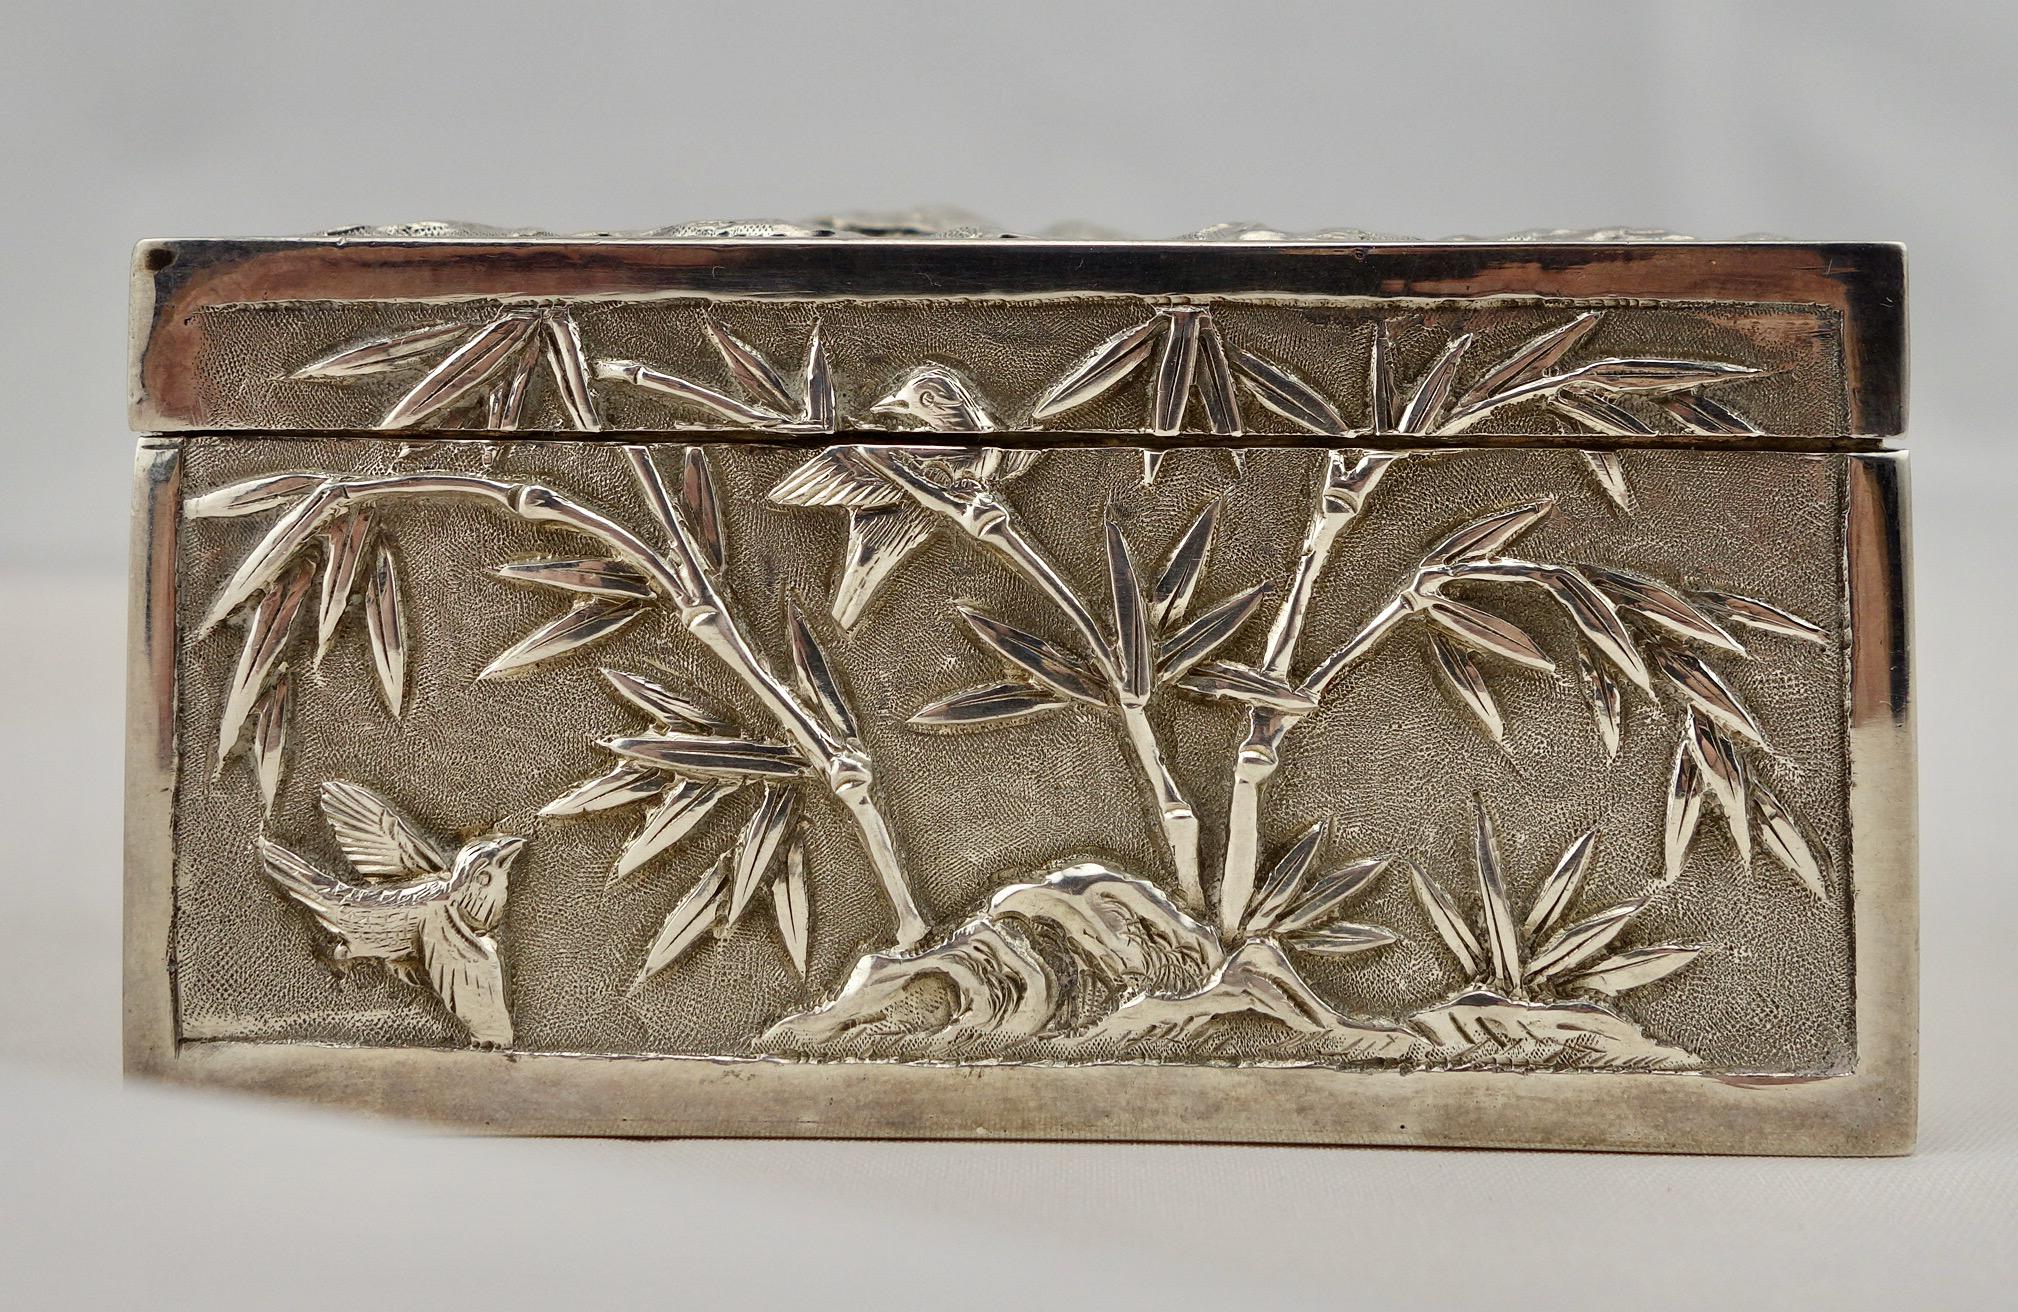 Repoussé Chinese Export Silver Repousse Scenic Box by Wang Hing, circa 1870 For Sale